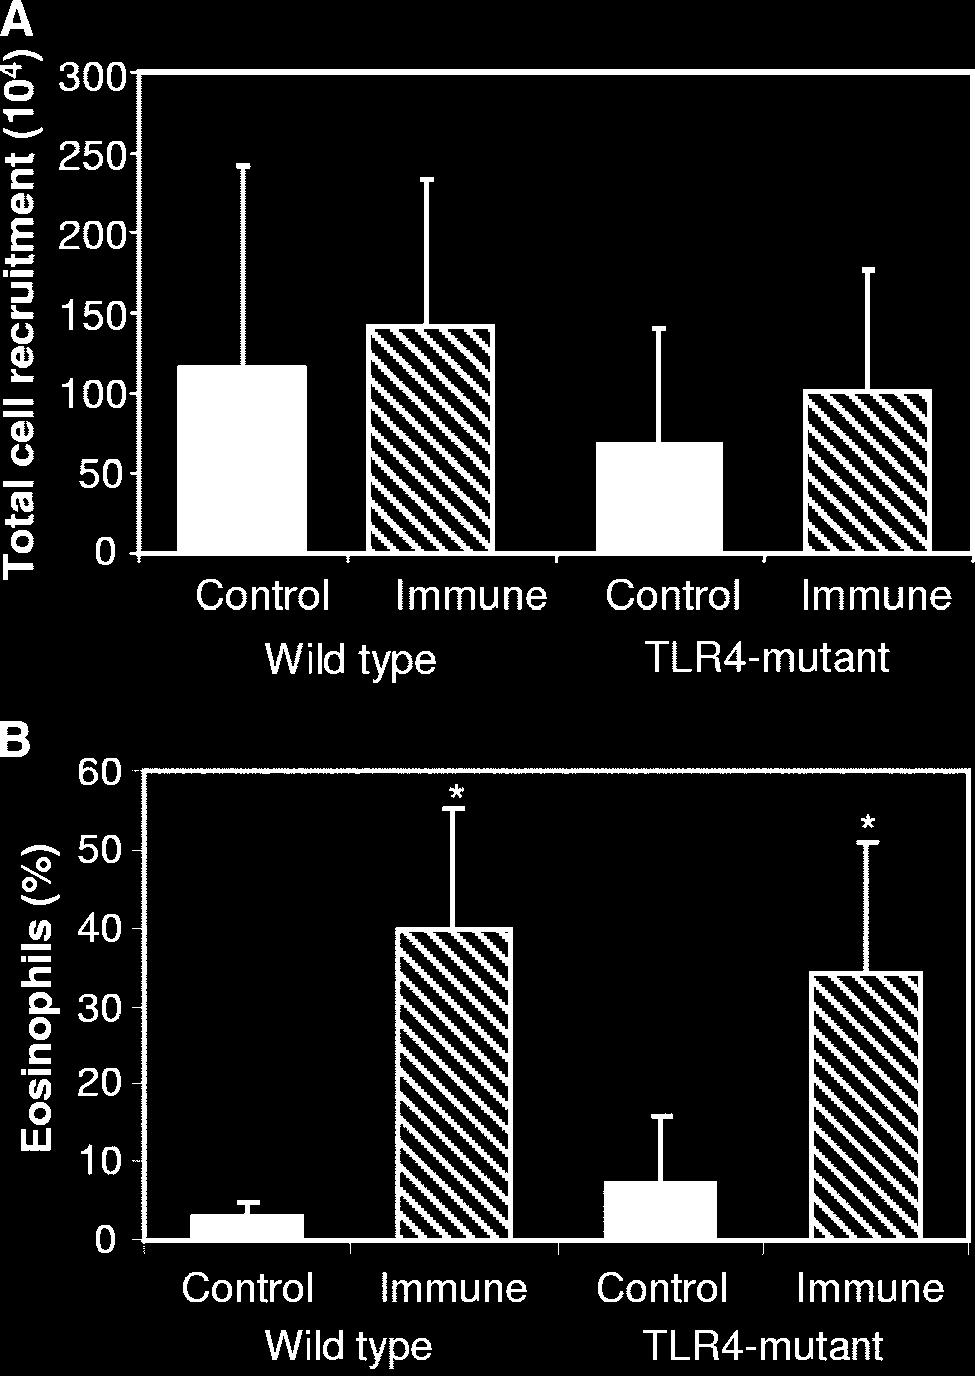 VOL. 73, 2005 PROTECTIVE IMMUNITY TO O. VOLVULUS L3 REQUIRES TLR4 8293 FIG. 2. Total cell and eosinophil recruitment in wild-type and TLR4-mutant mice.